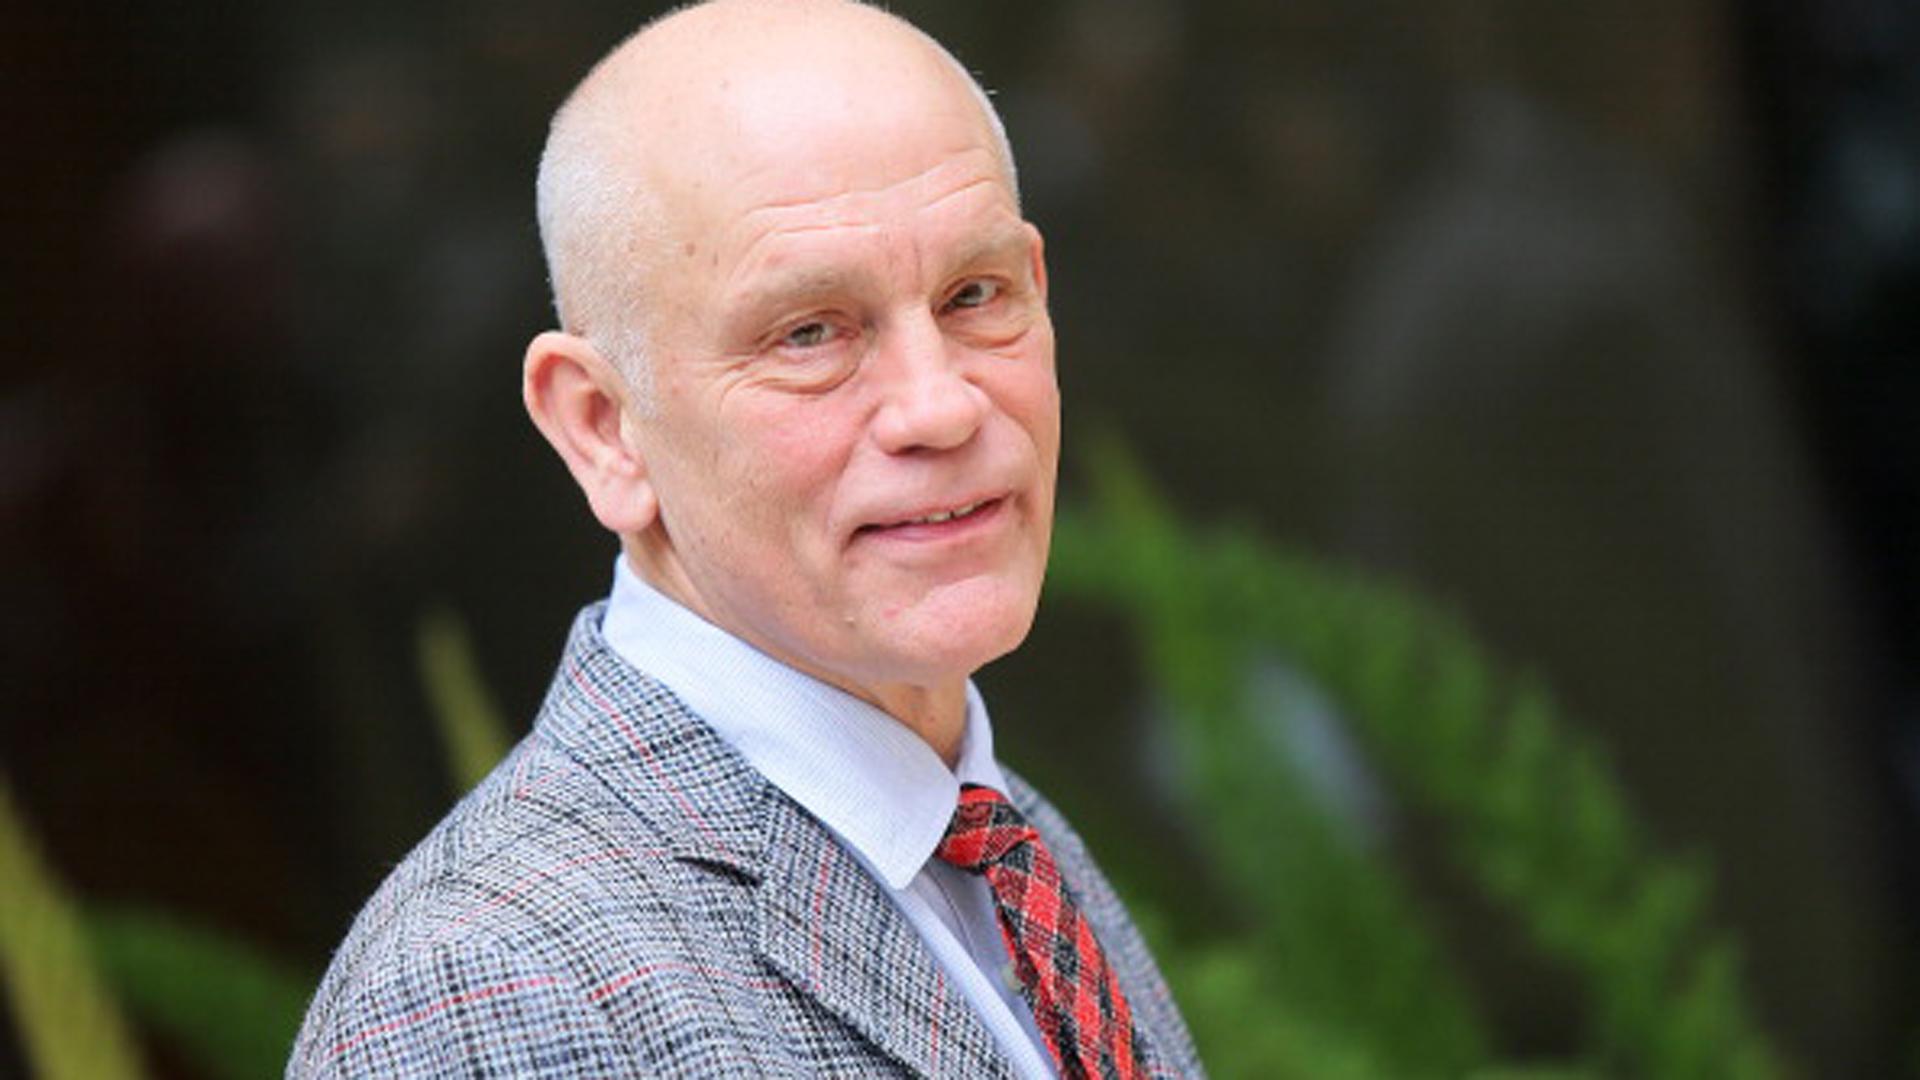 AFM: John Malkovich and Toni Collette Join Thriller 'Unlocked'